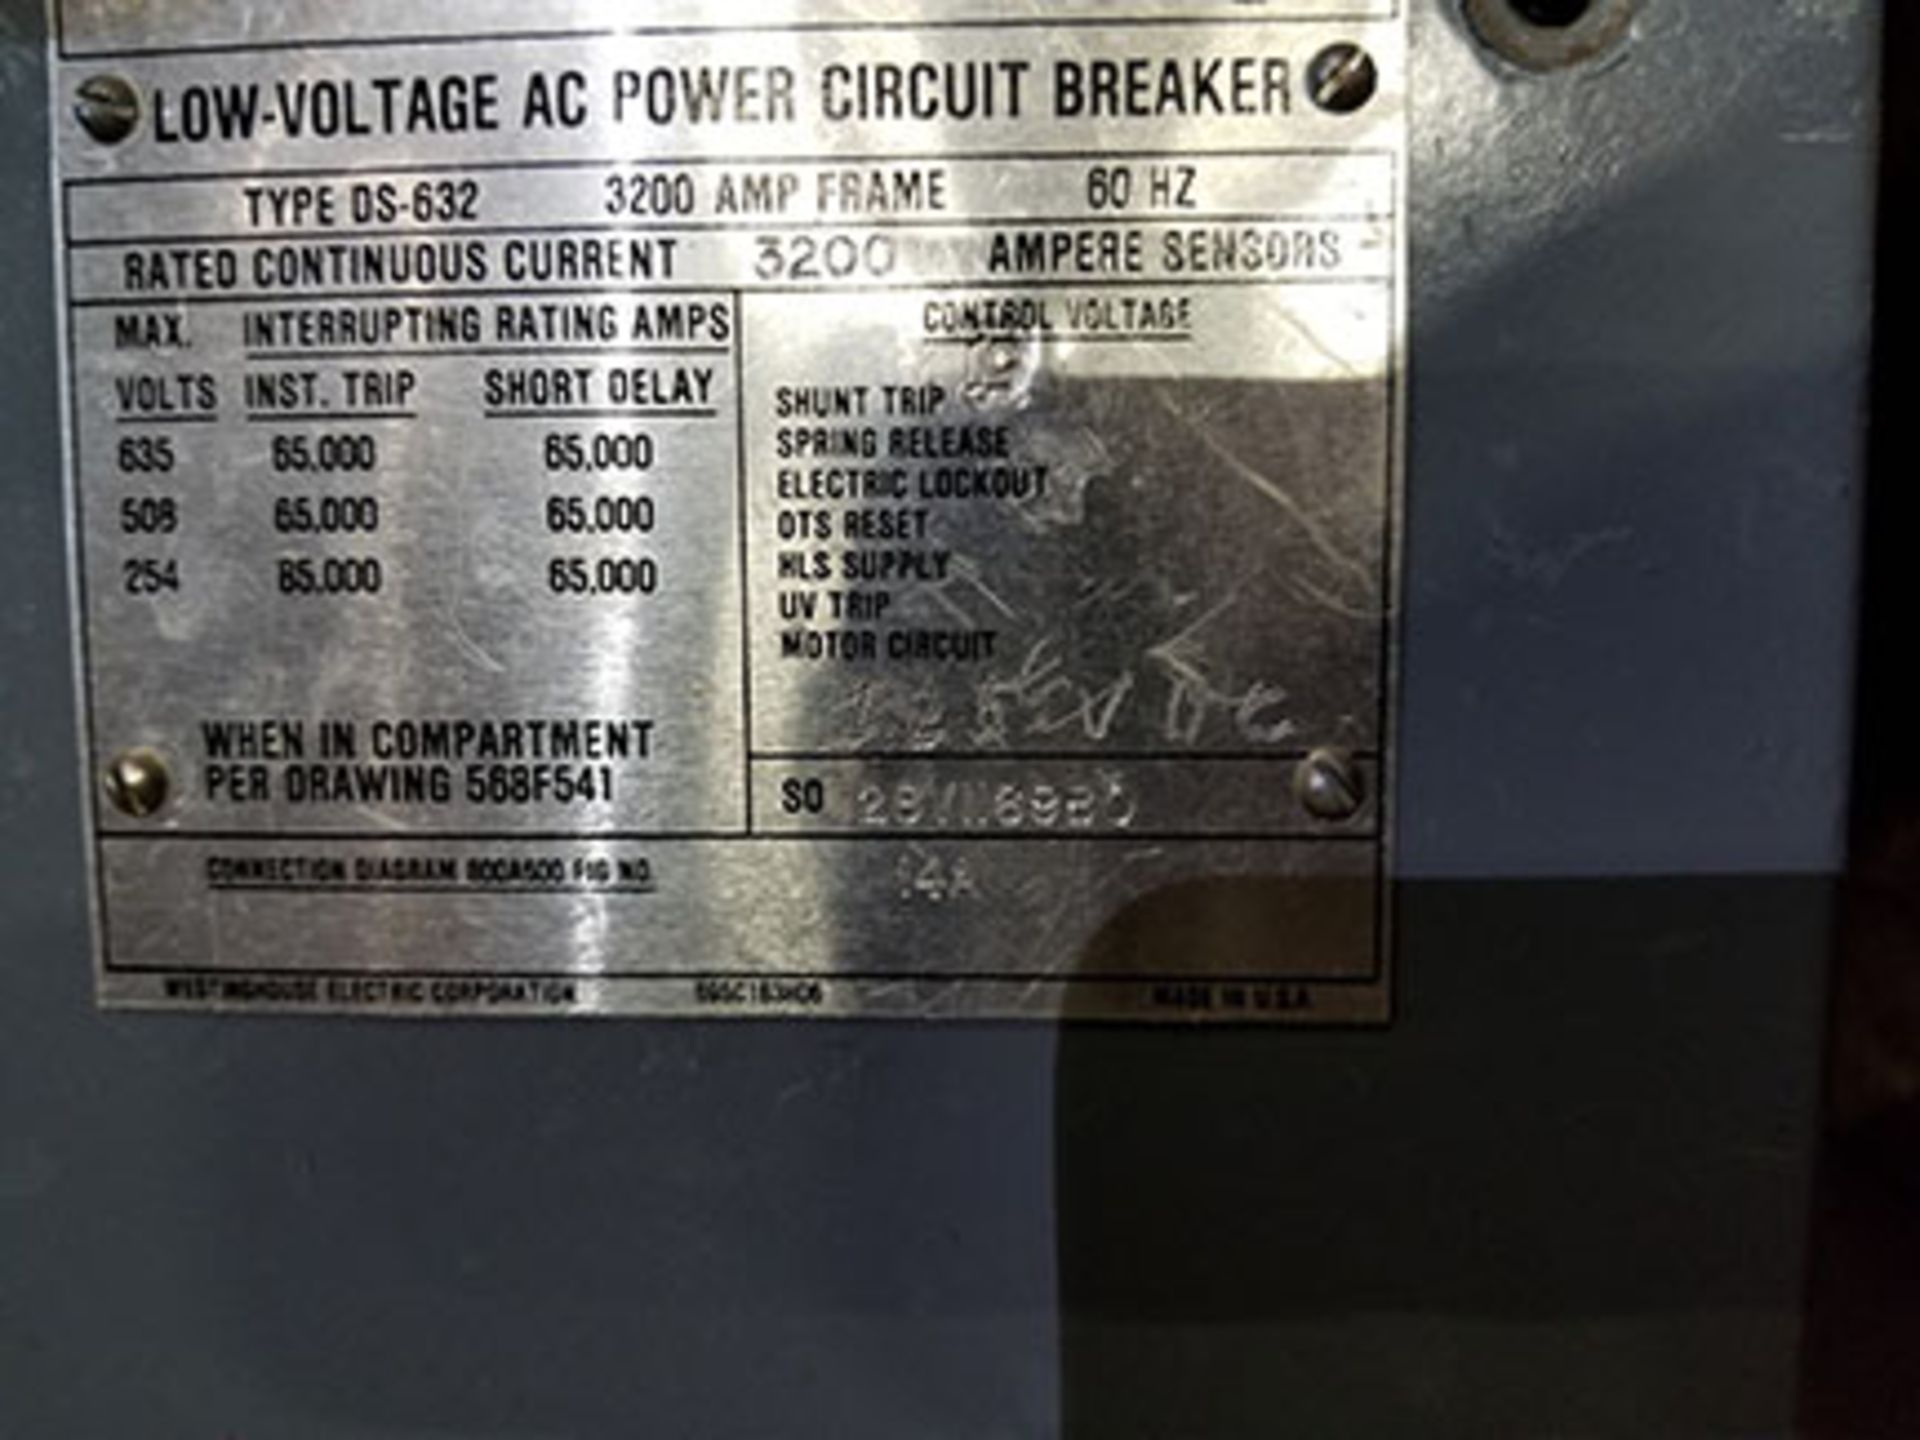 WESTINGHOUSE LOW-VOLTAGE AC POWER CIRCUIT BREAKER, TYPE DS-632, 3,200 AMP FRAME, 60HZ, CONT. - Image 5 of 5